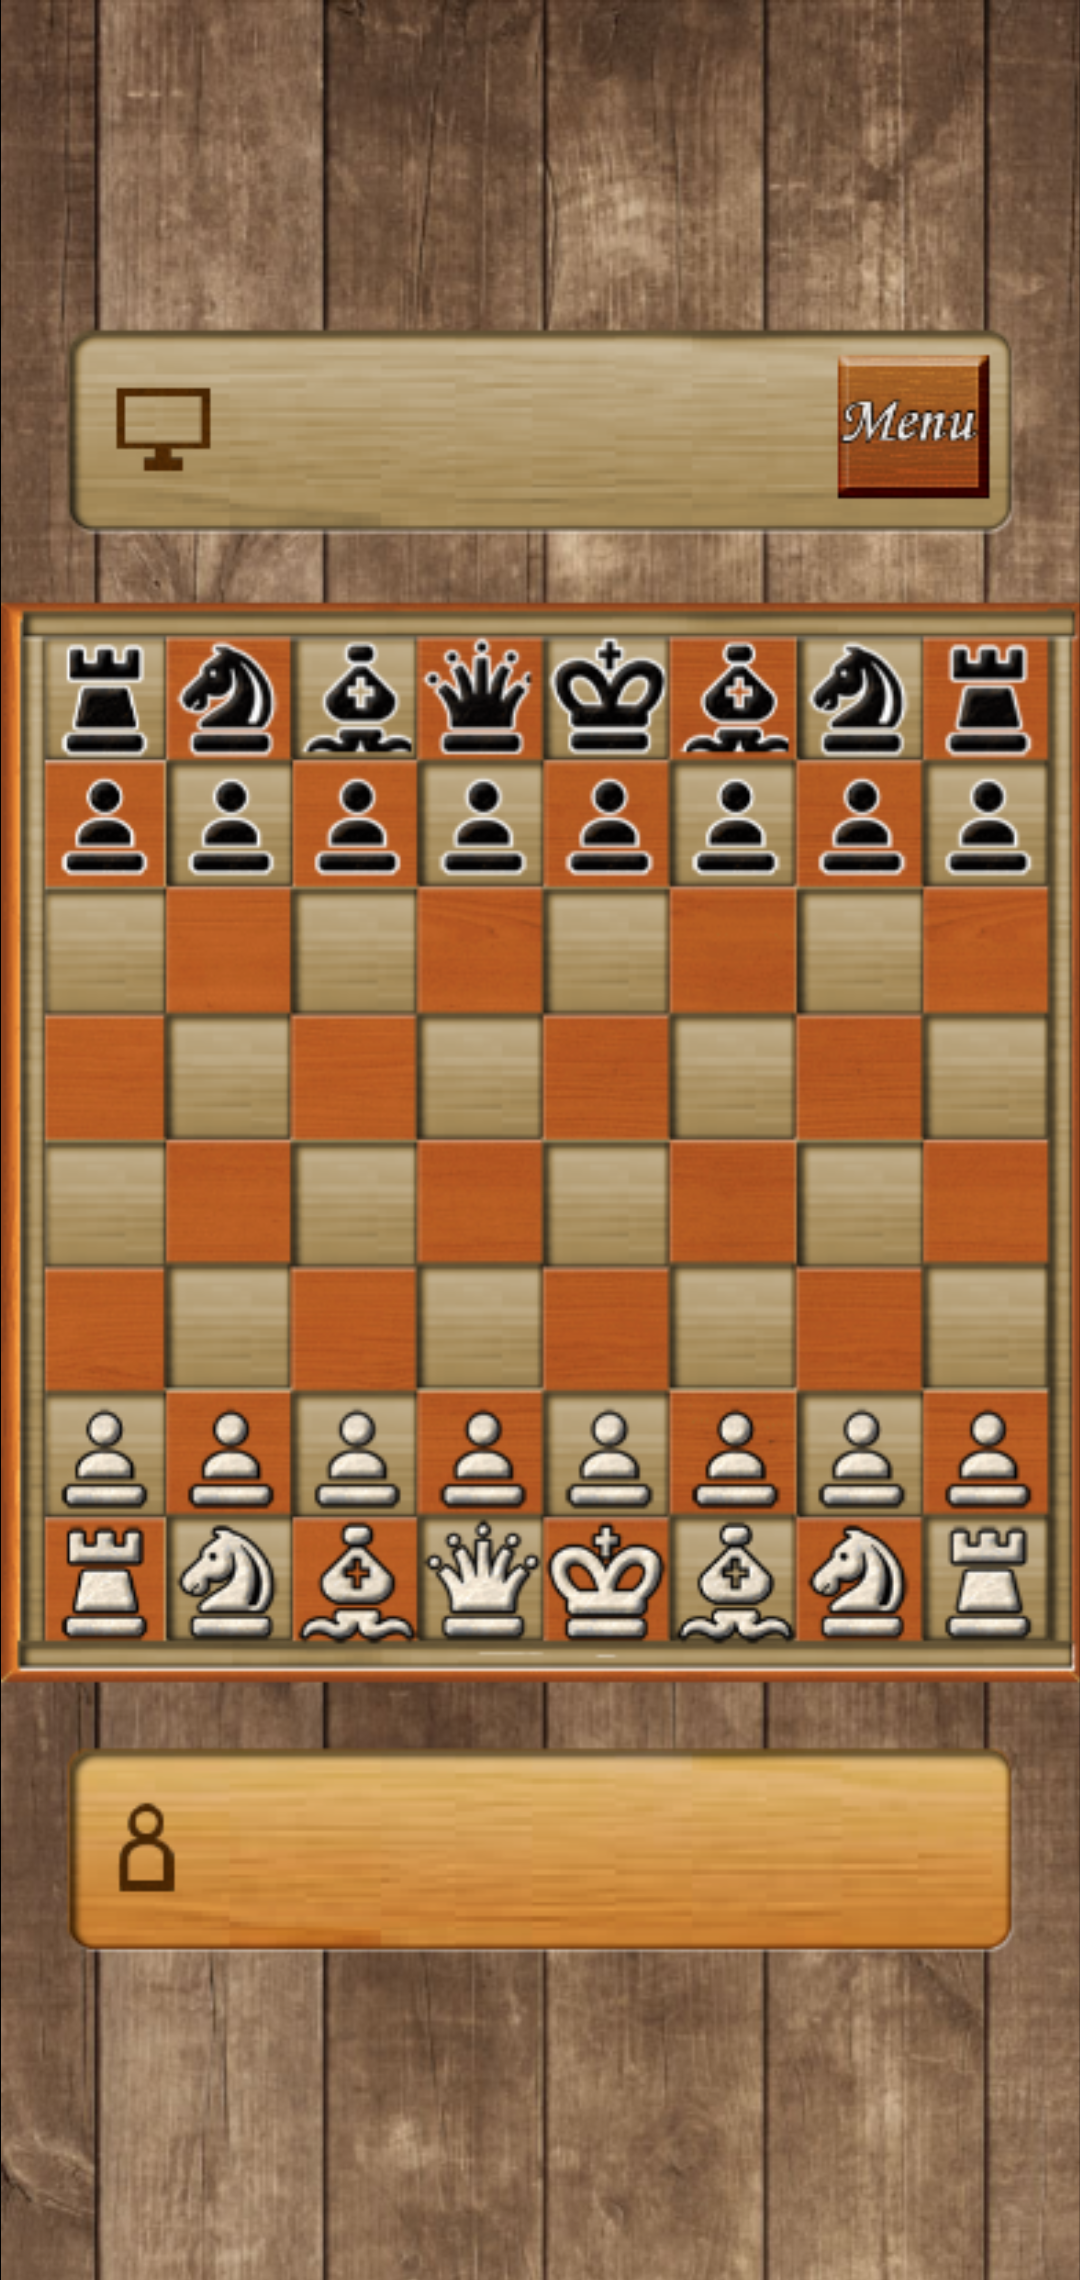 Chess for Android (Android) - Download